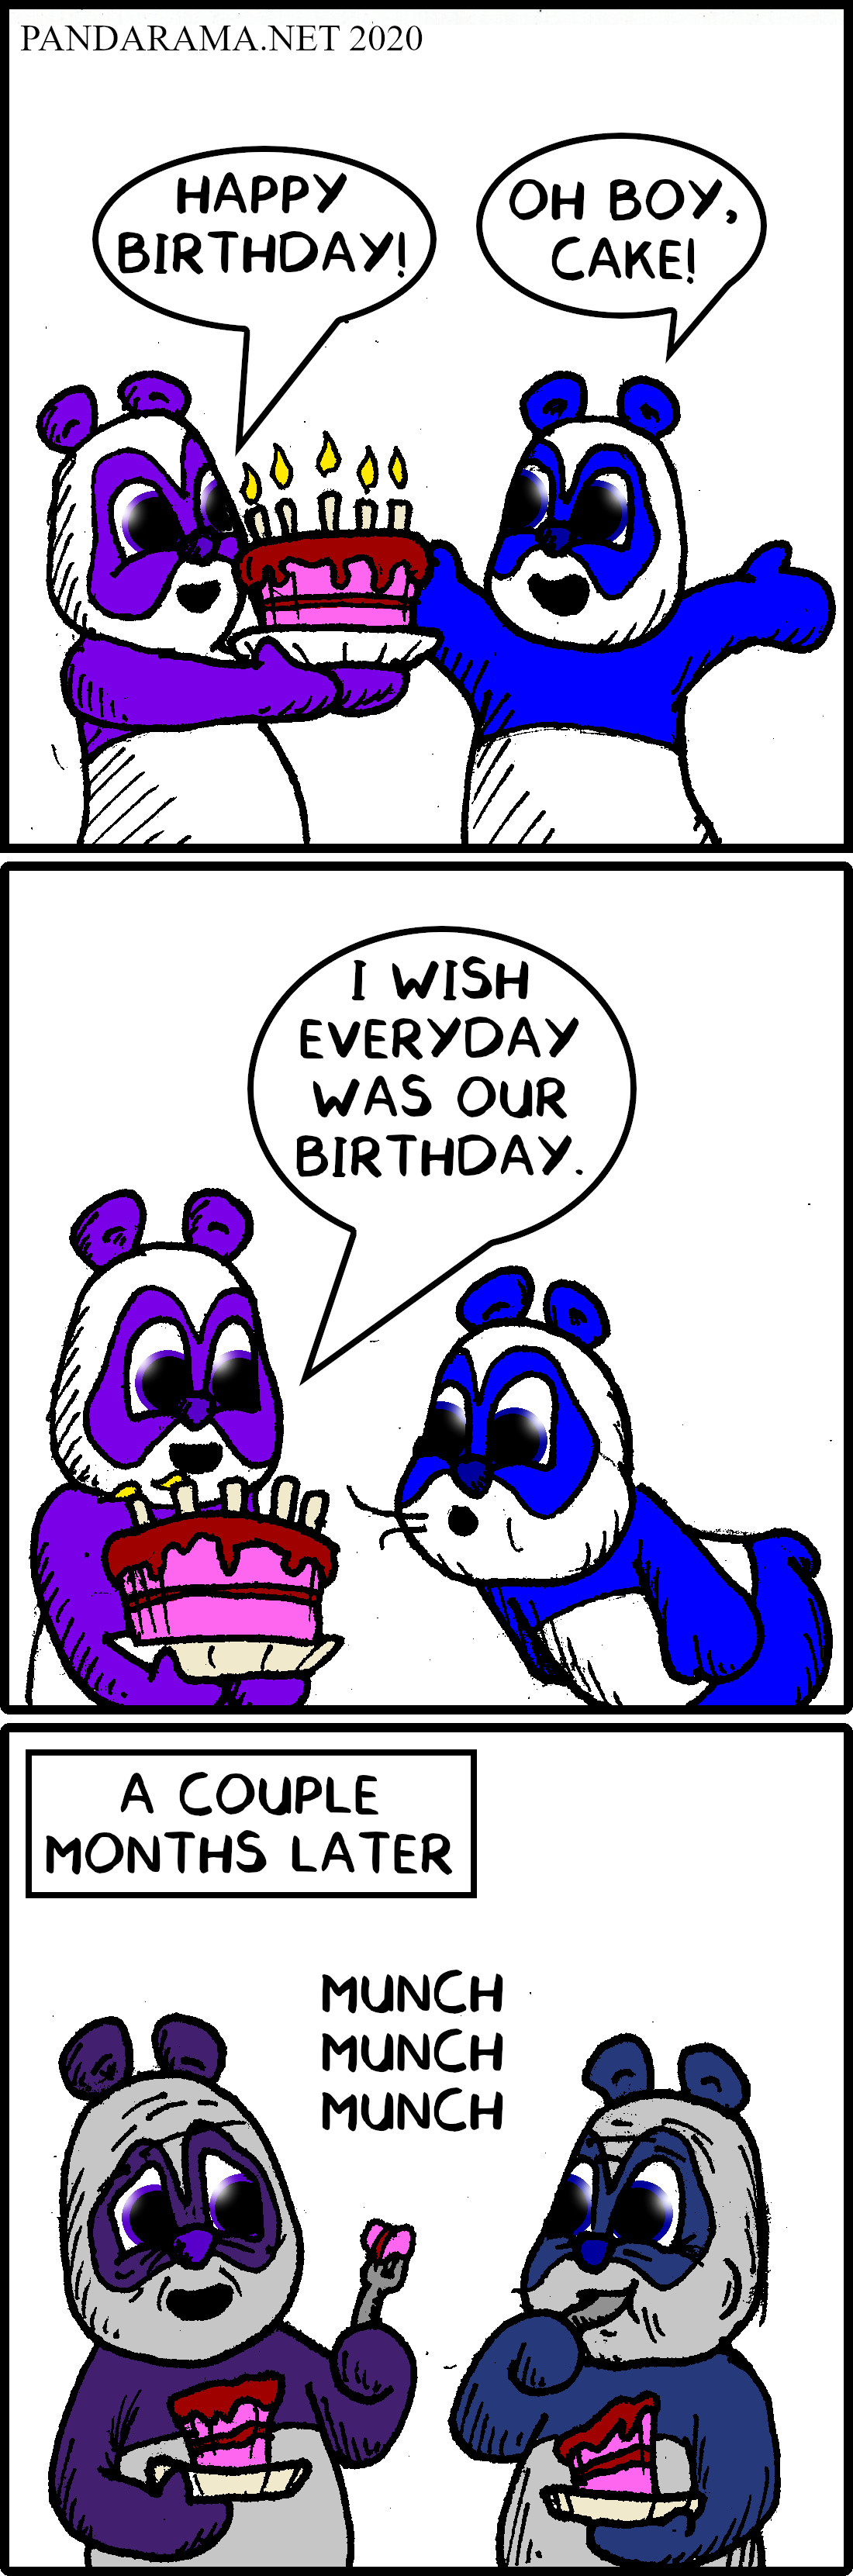 webcomic. Panda birthday wish is that everyday is birthday so they'll get more cake and then age at an accelerated rate.